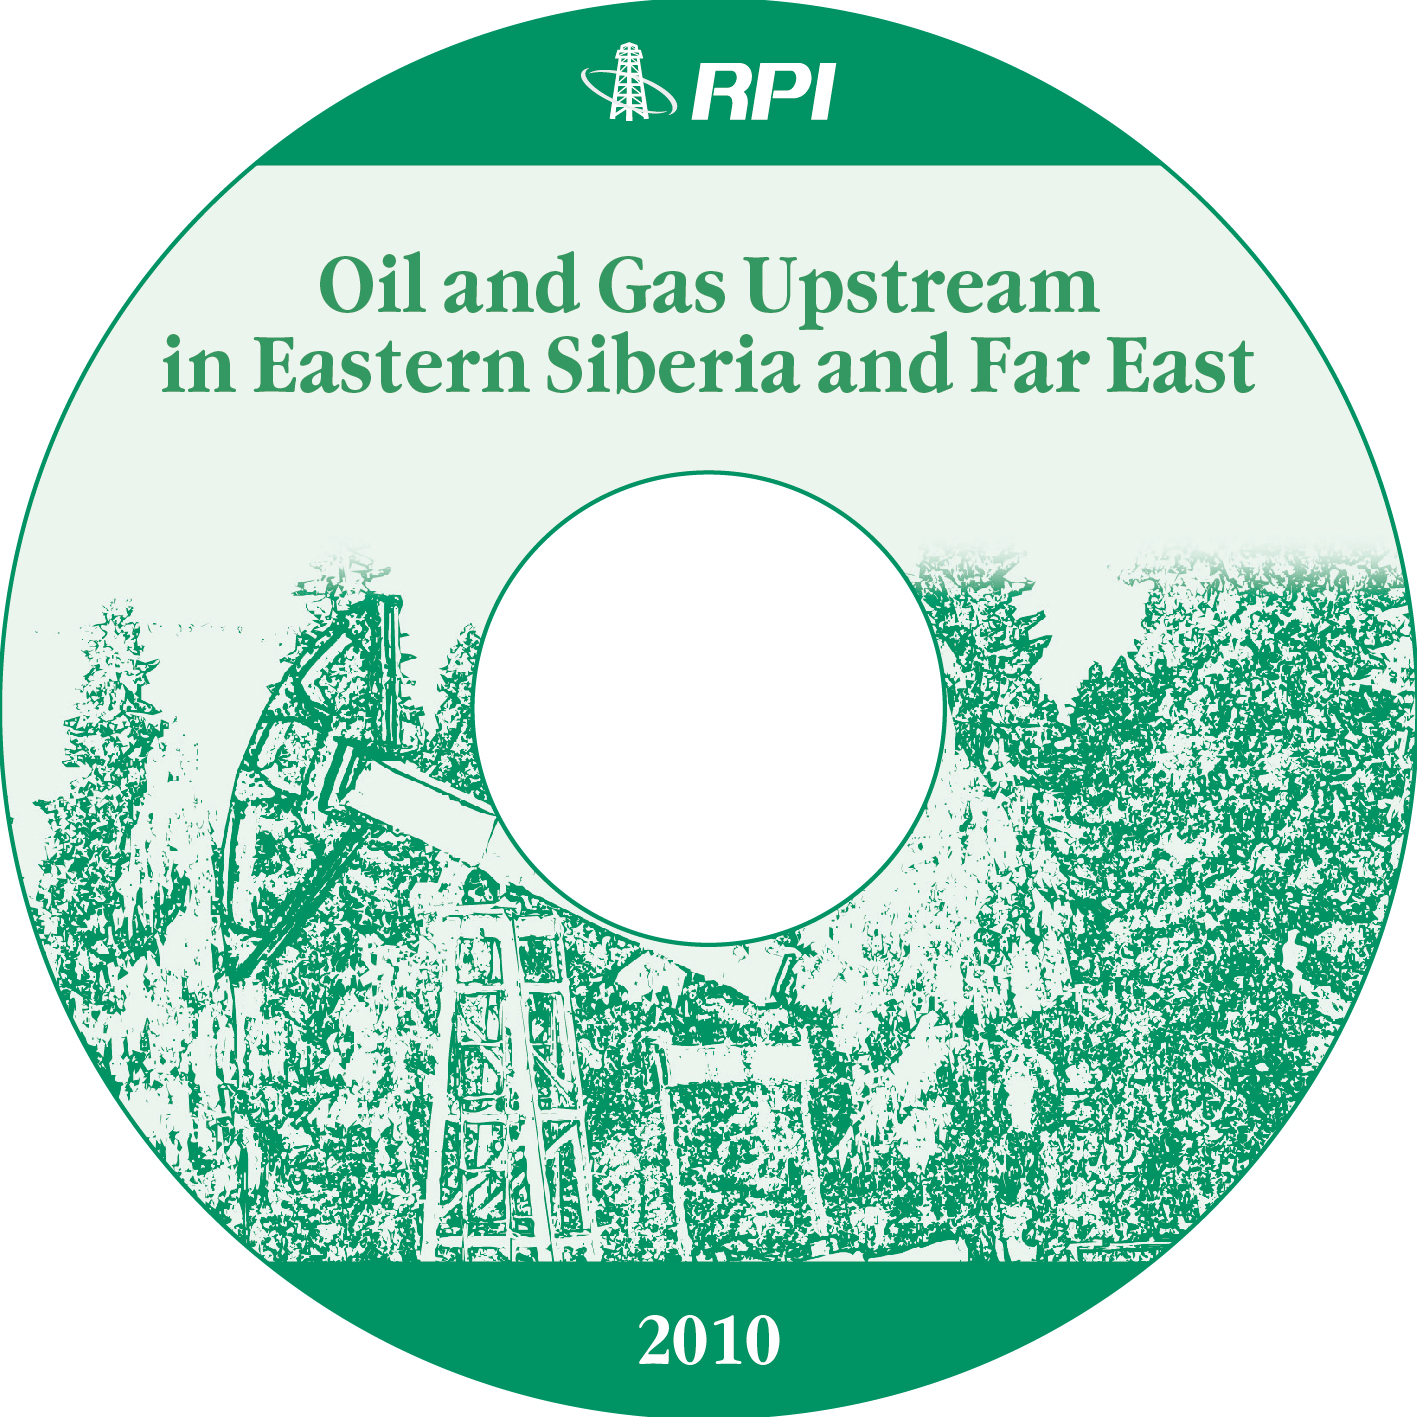 Oil and Gas Upstream in Eastern Siberia and Far East